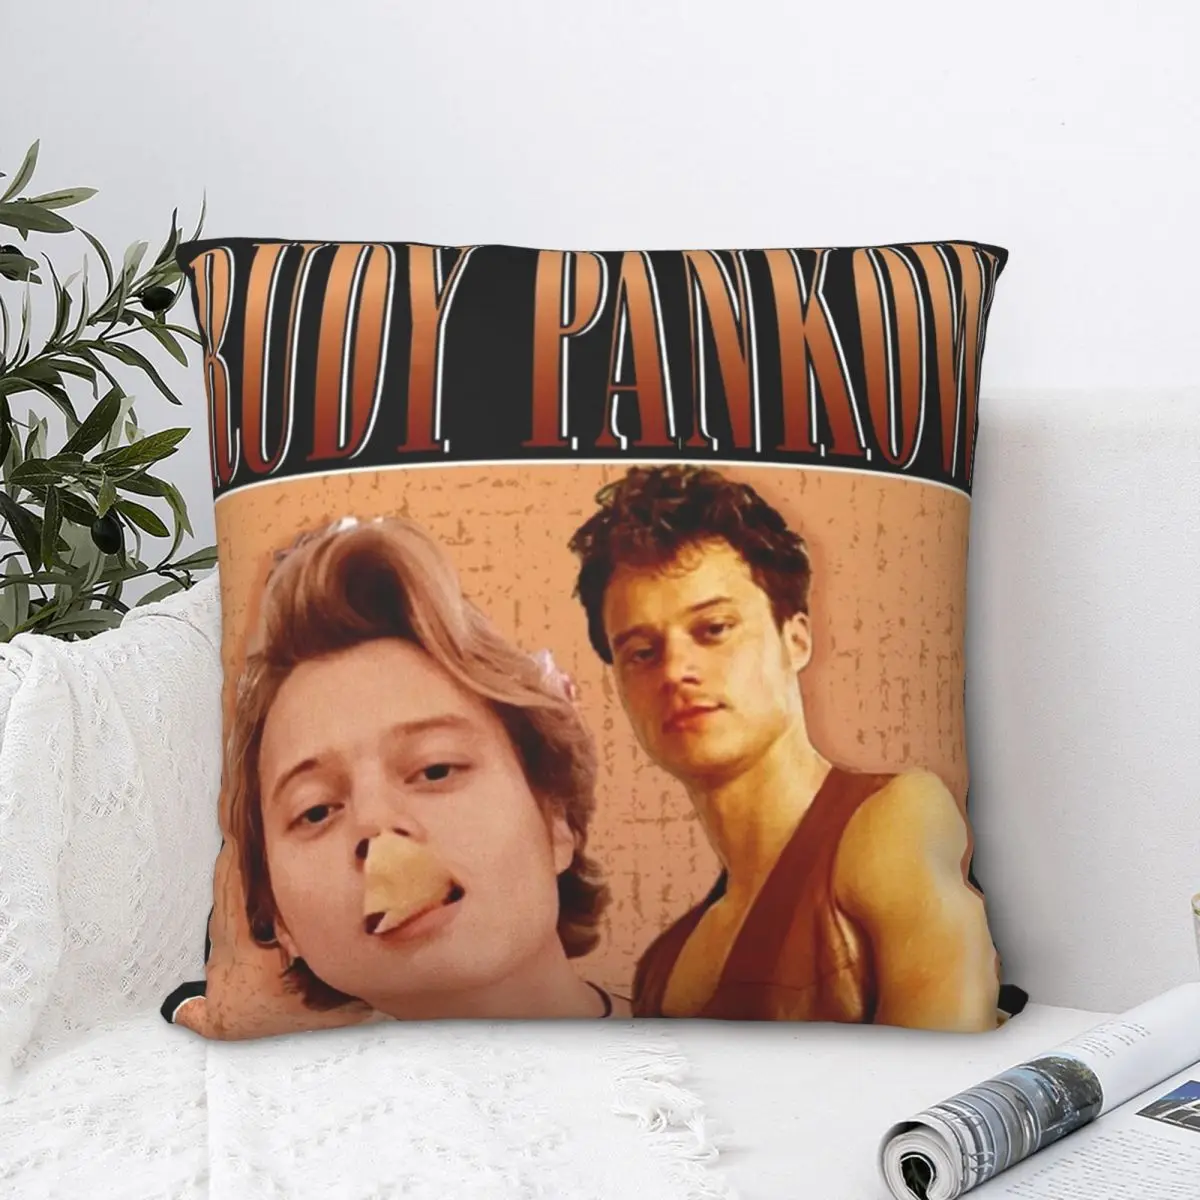 

Drew Starkey And Rudy Pankow Pillowcase Soft Polyester Cushion Cover Decoration Throw Pillow Case Cover Home Wholesale 18''